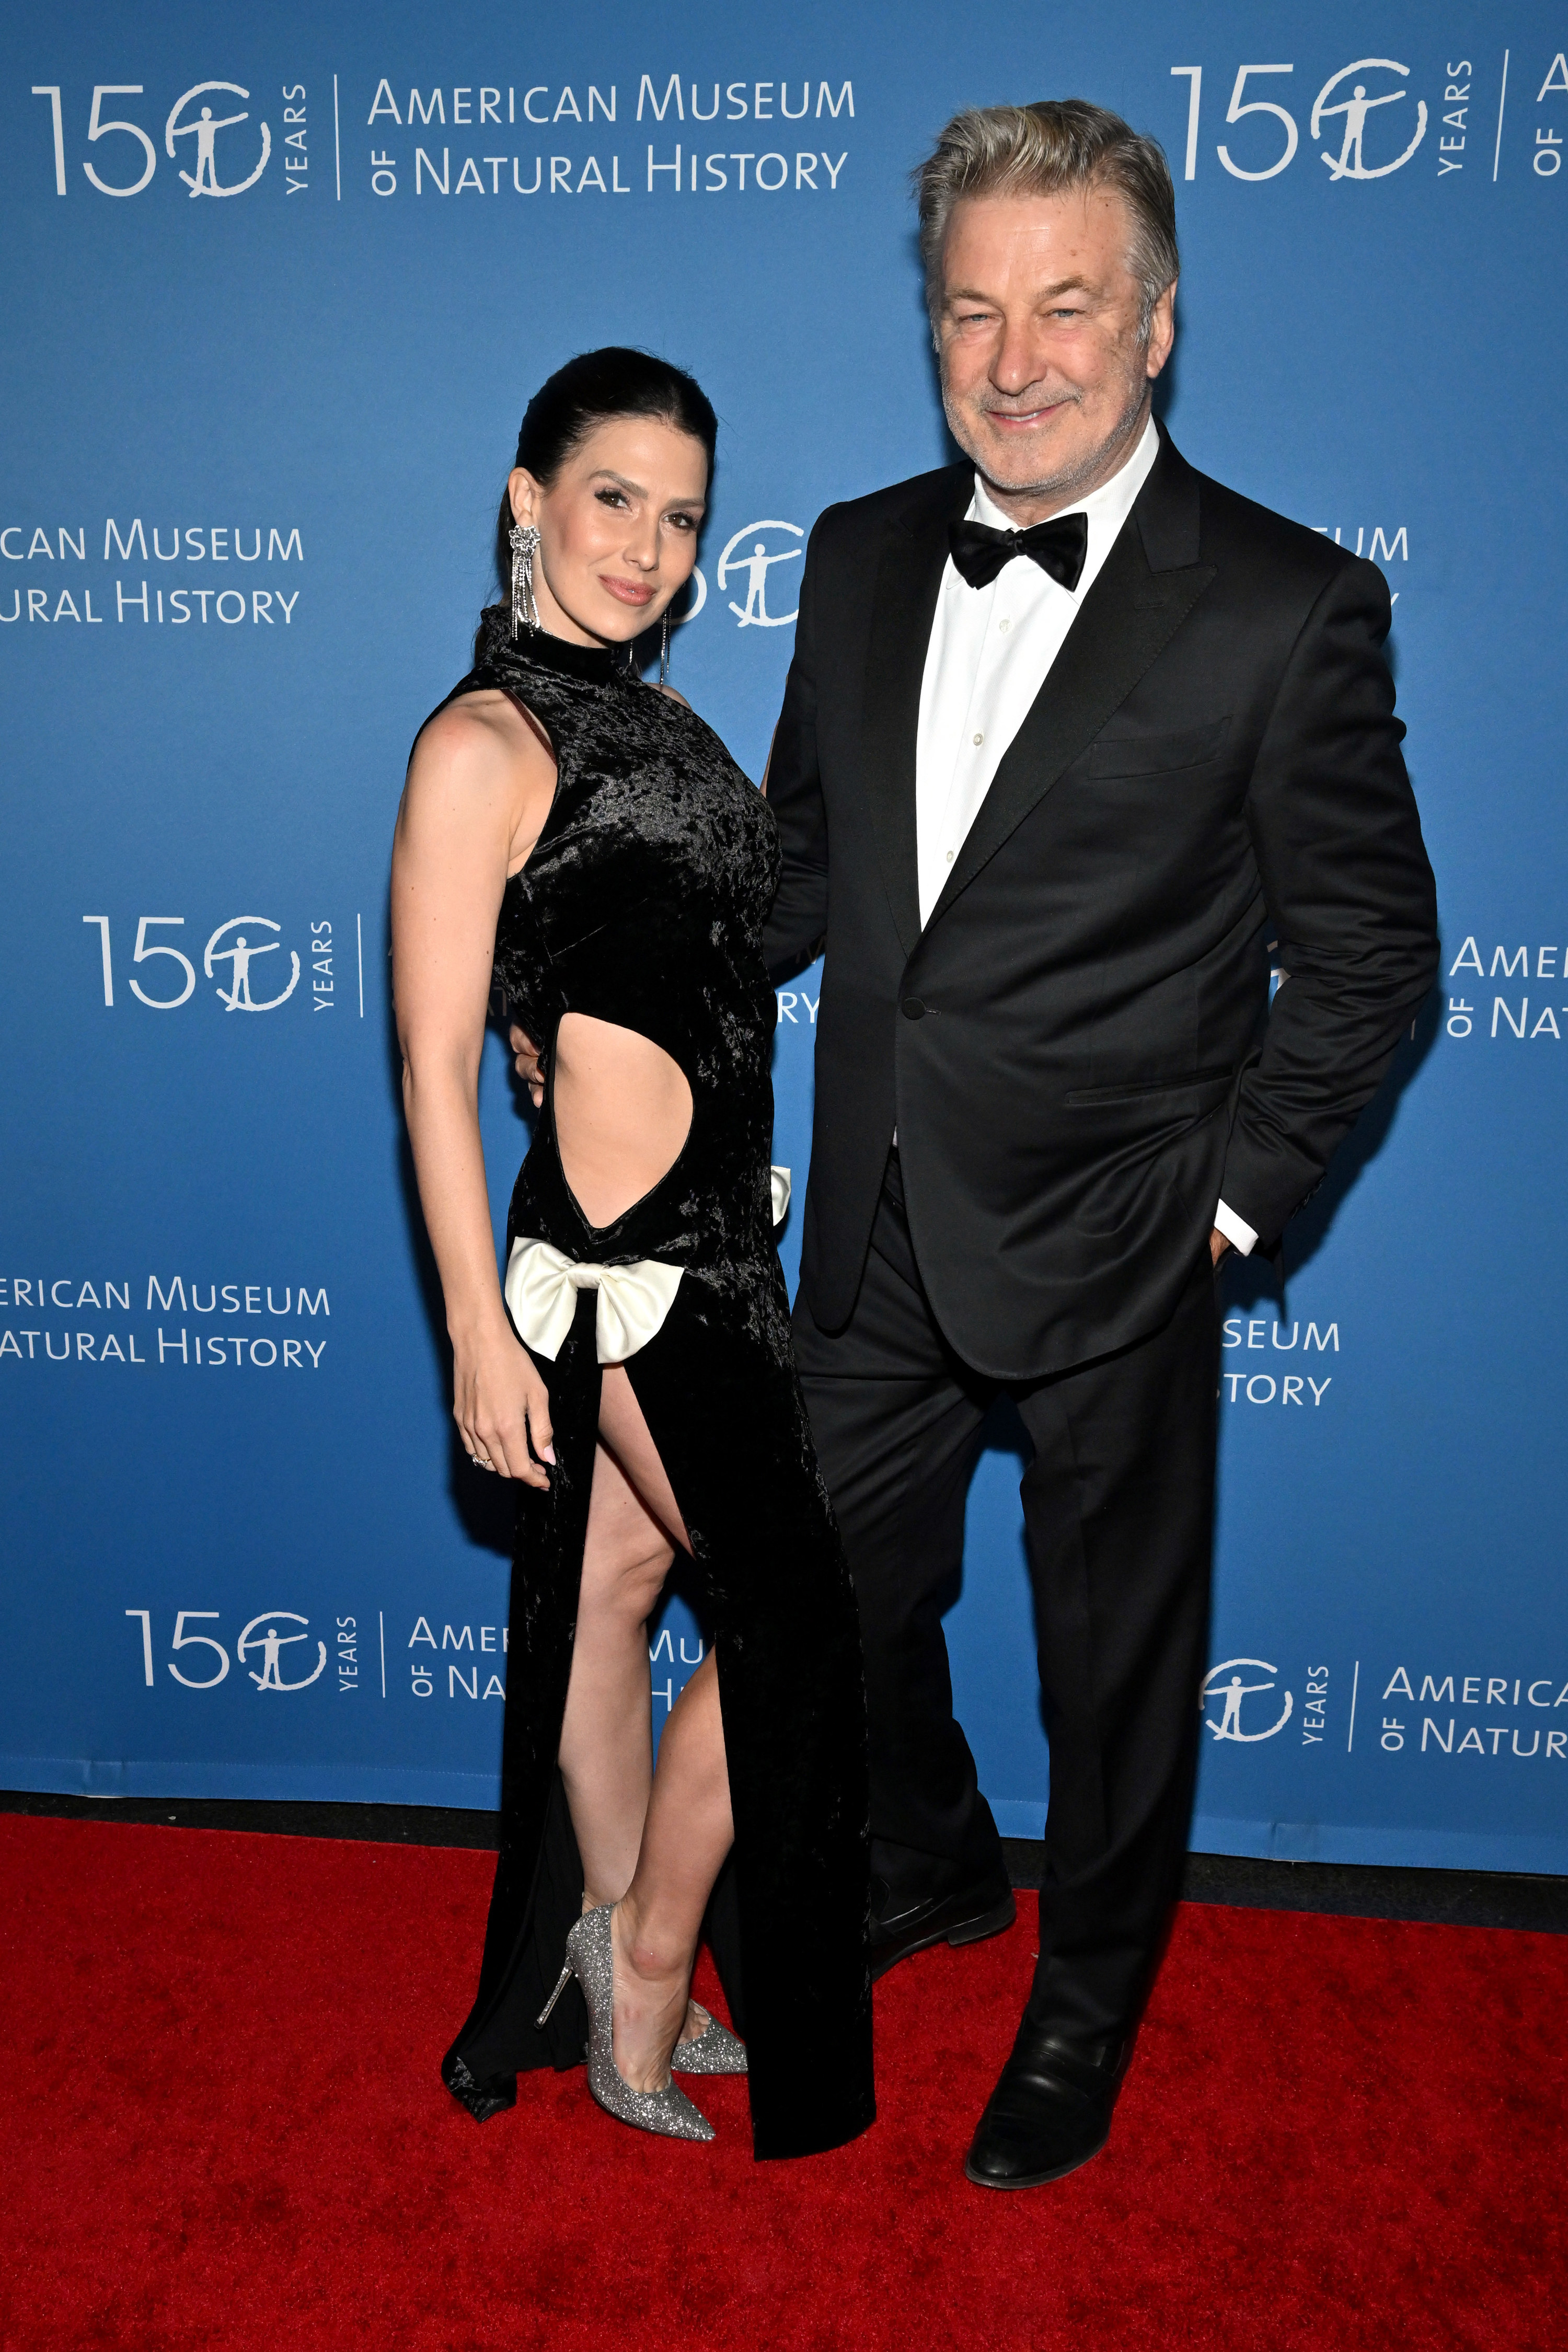 Hilaria posing for pictures on the red carpet with her husband Alec Baldwin